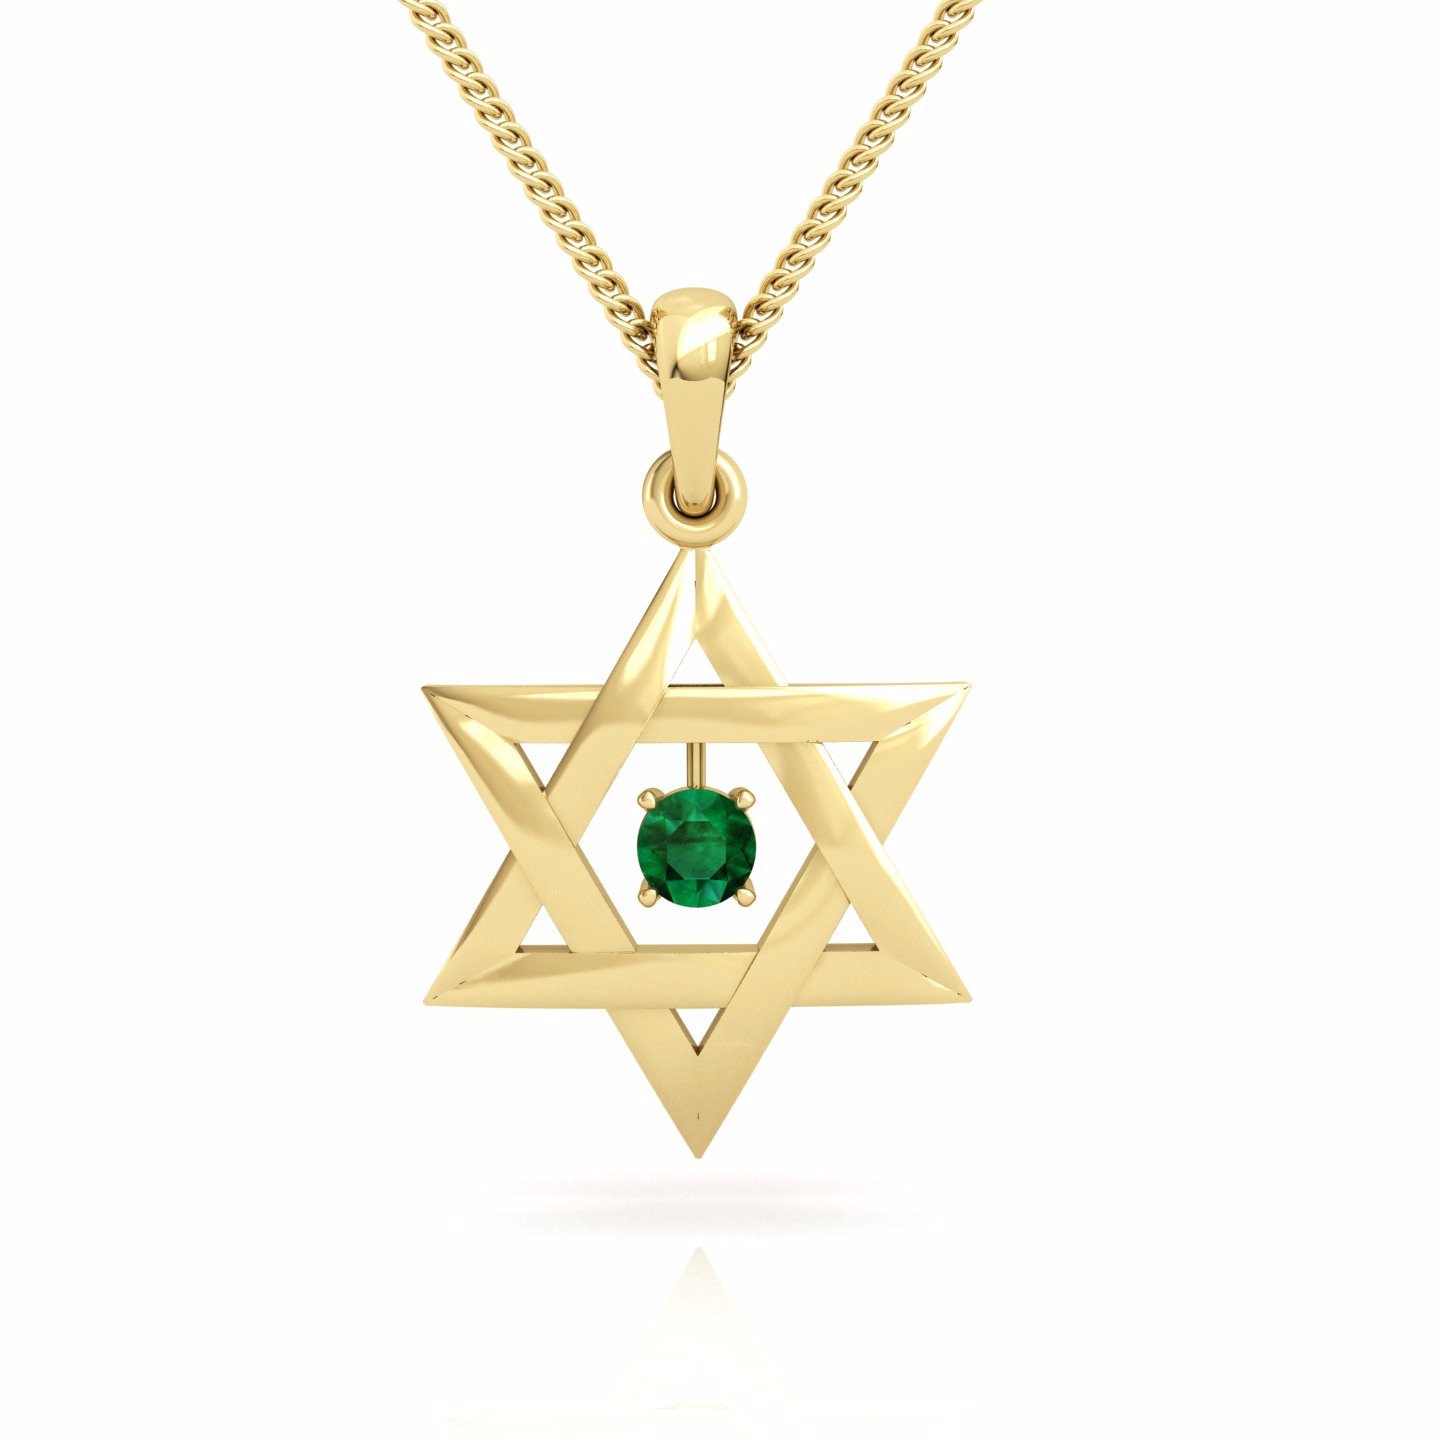 Interwoven Star of David with a Round Gem Gold Pendant - Star of D